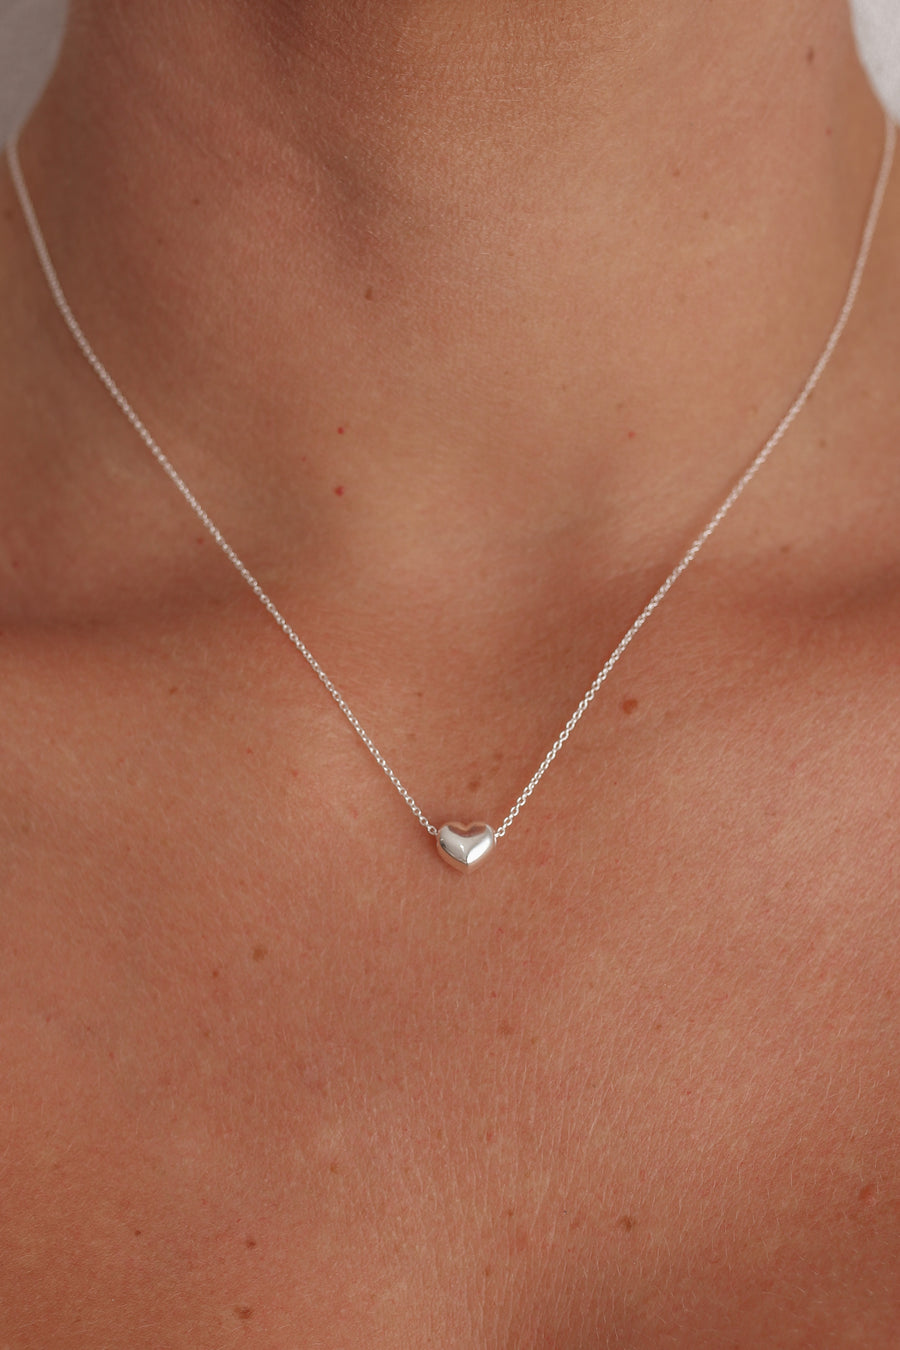 The Mother's Day - 18ct Gold or Silver Stainless Steel Heart Necklace